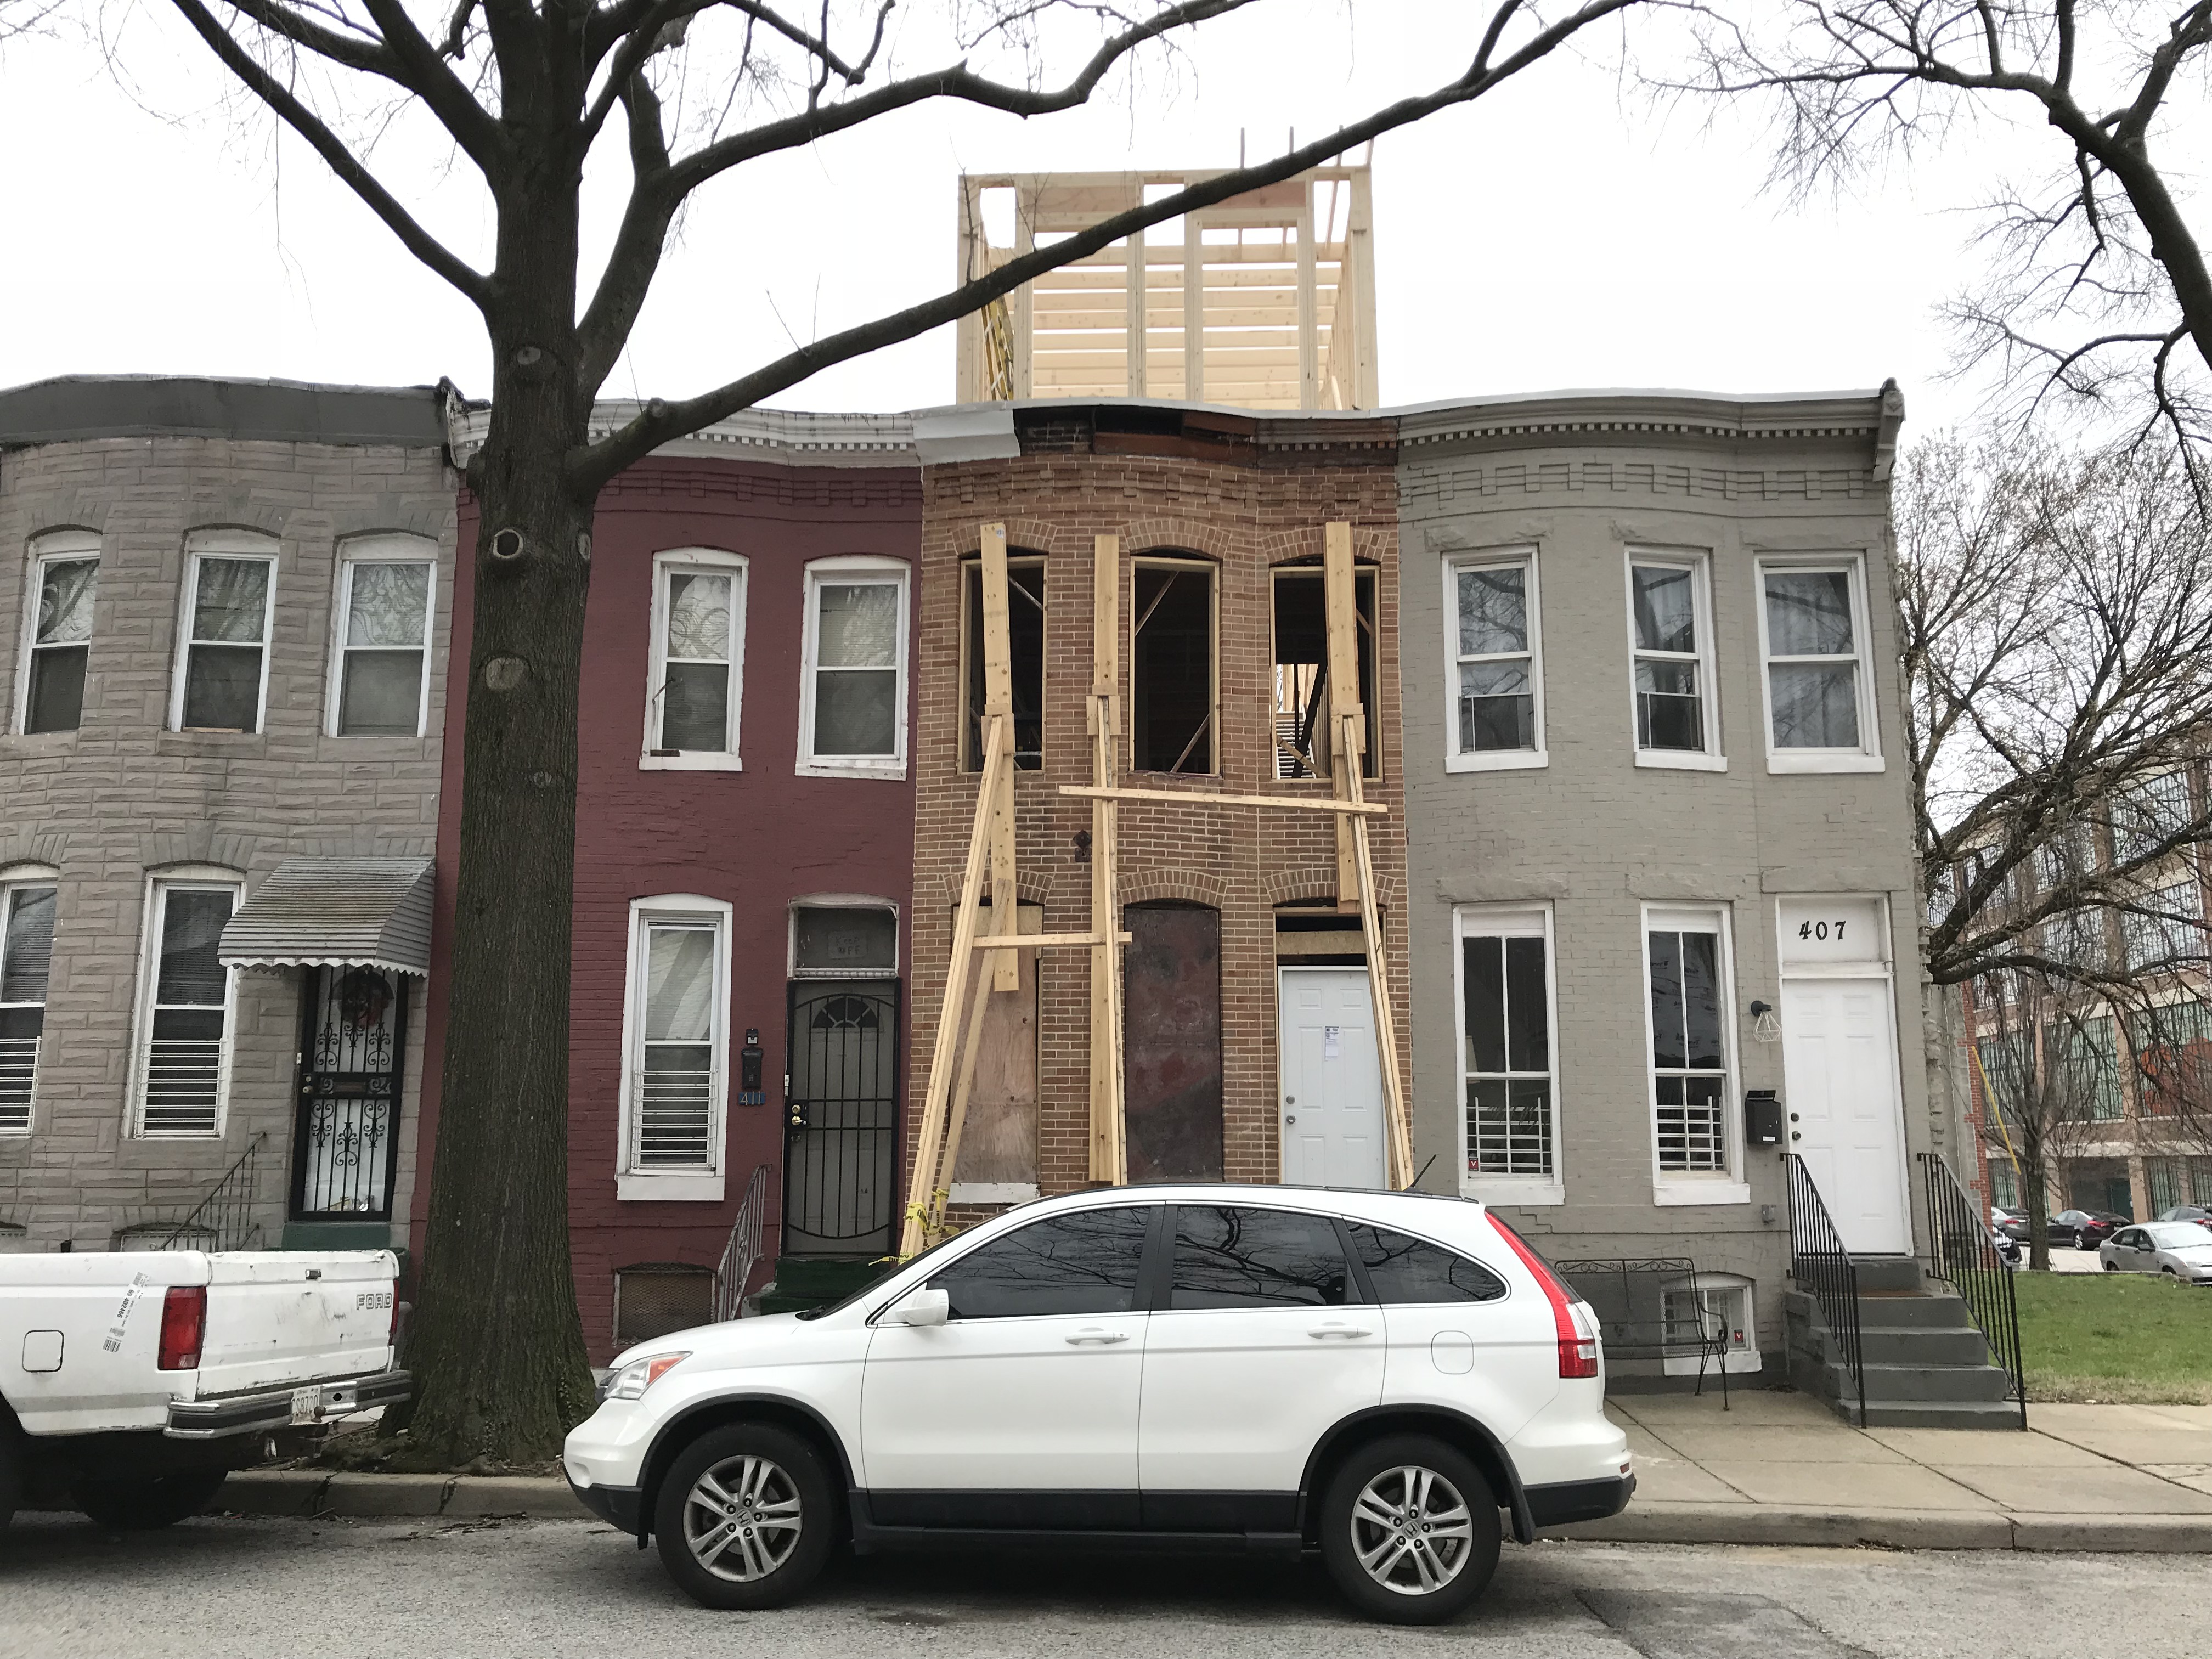 Rooftop addition and rowhouse rehabilitation, 409 e. federal street, baltimore, md 21202 photo